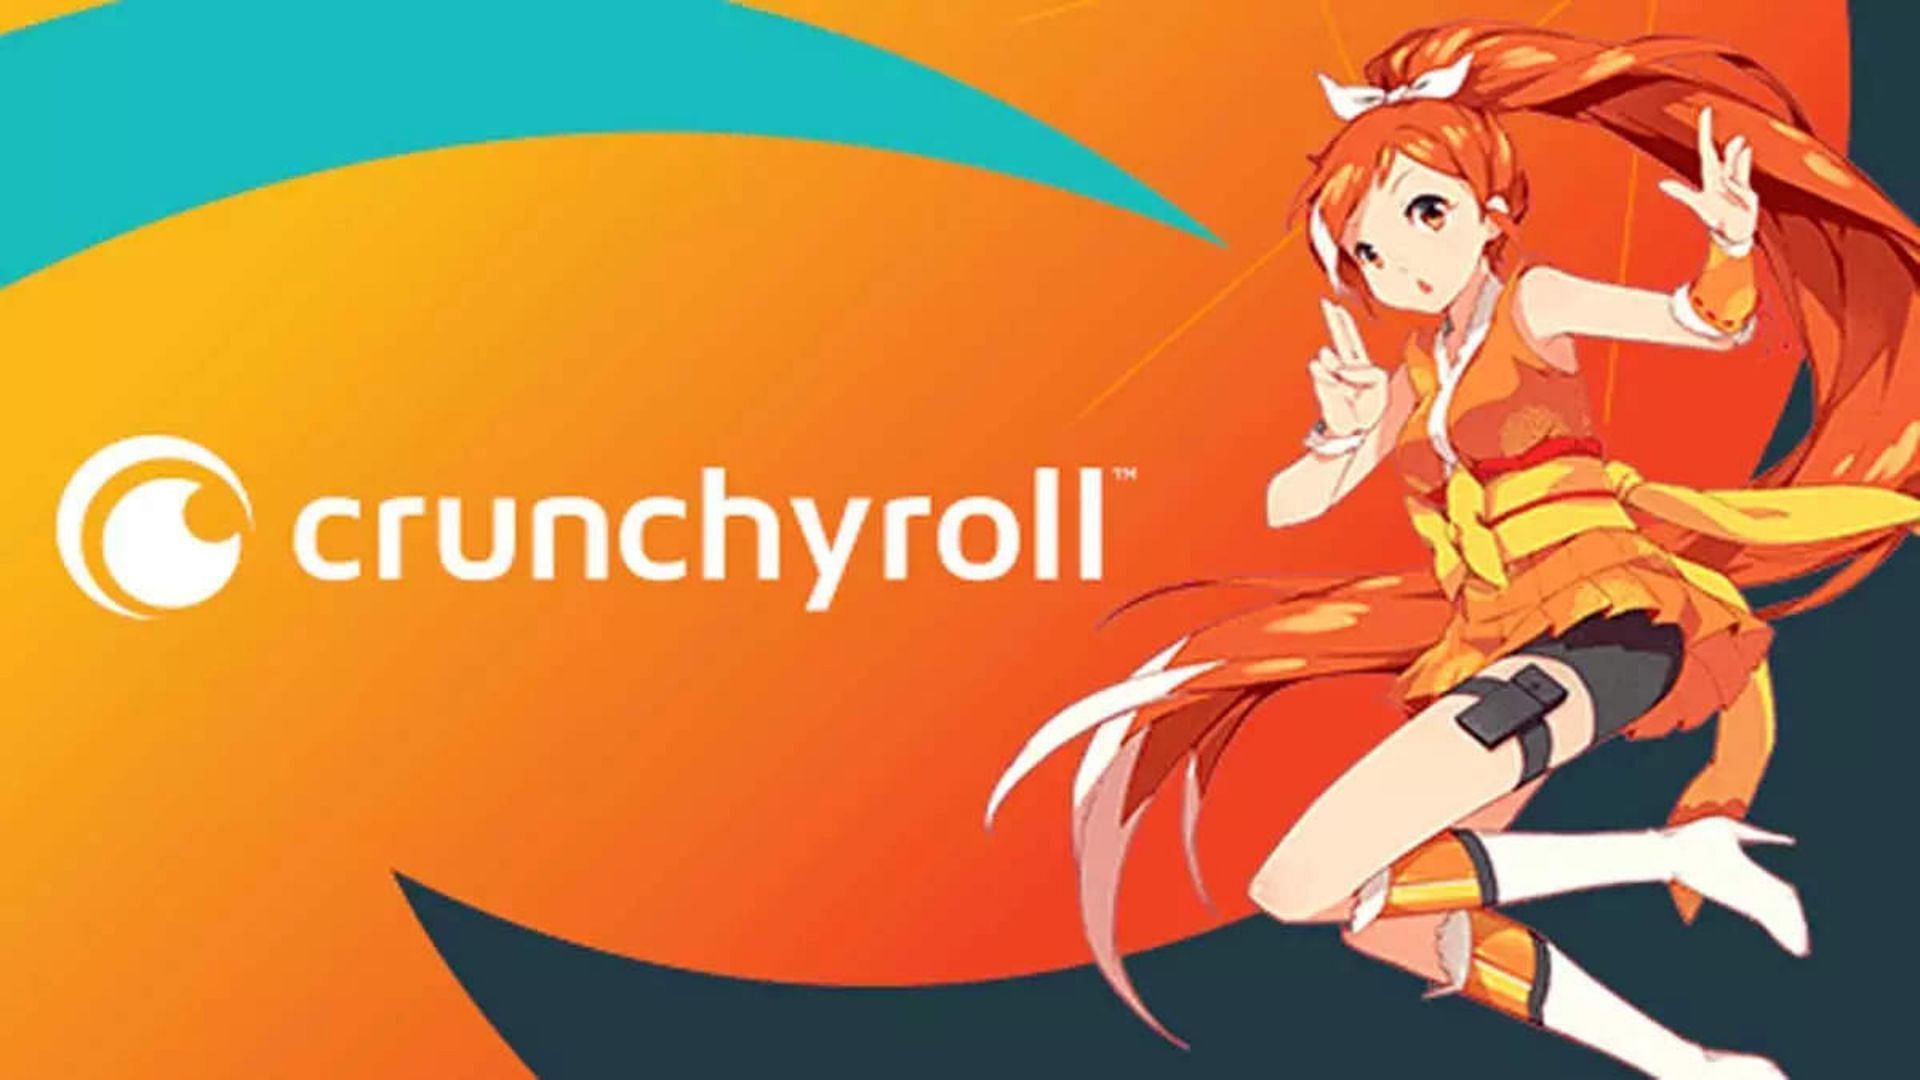 Crunchyroll - Very crucial information for the investigation 🧐